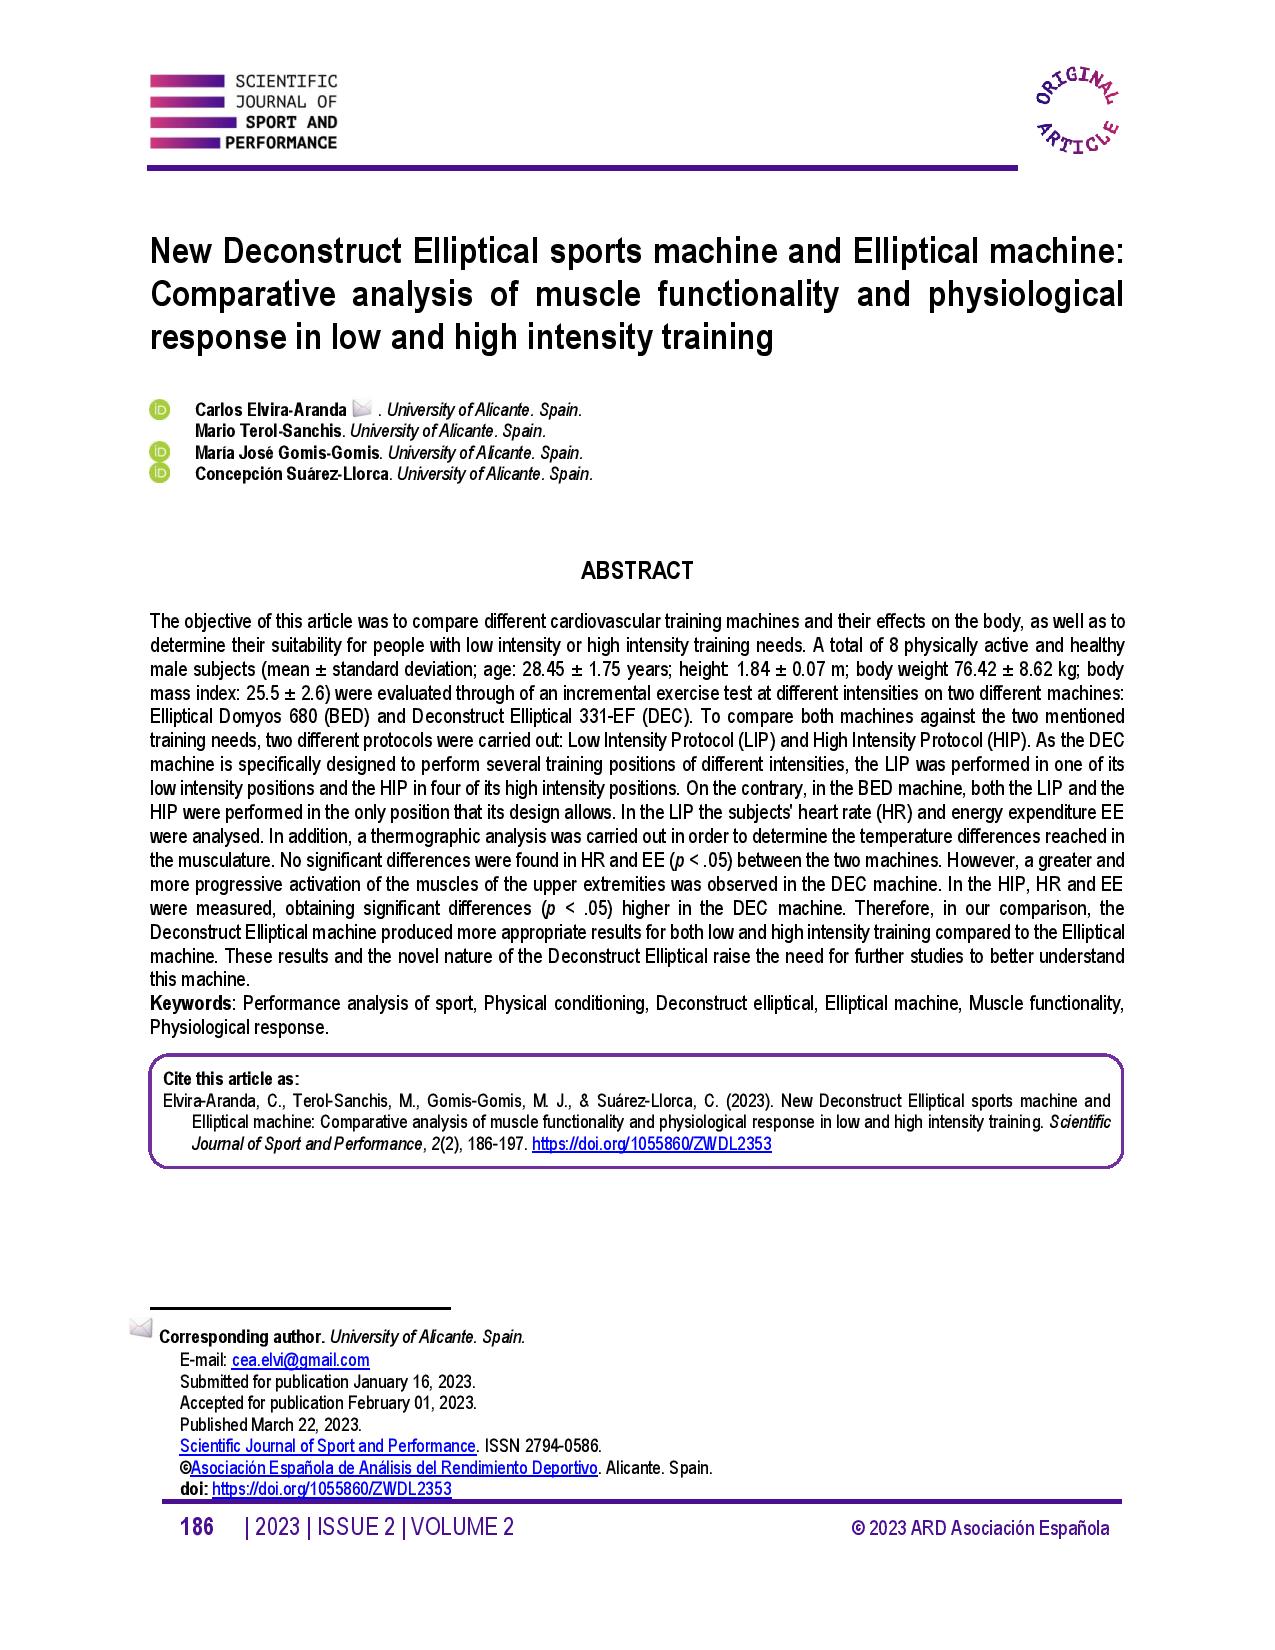 New Deconstruct Elliptical sports machine and Elliptical machine: Comparative analysis of muscle functionality and physiological response in low and high intensity training